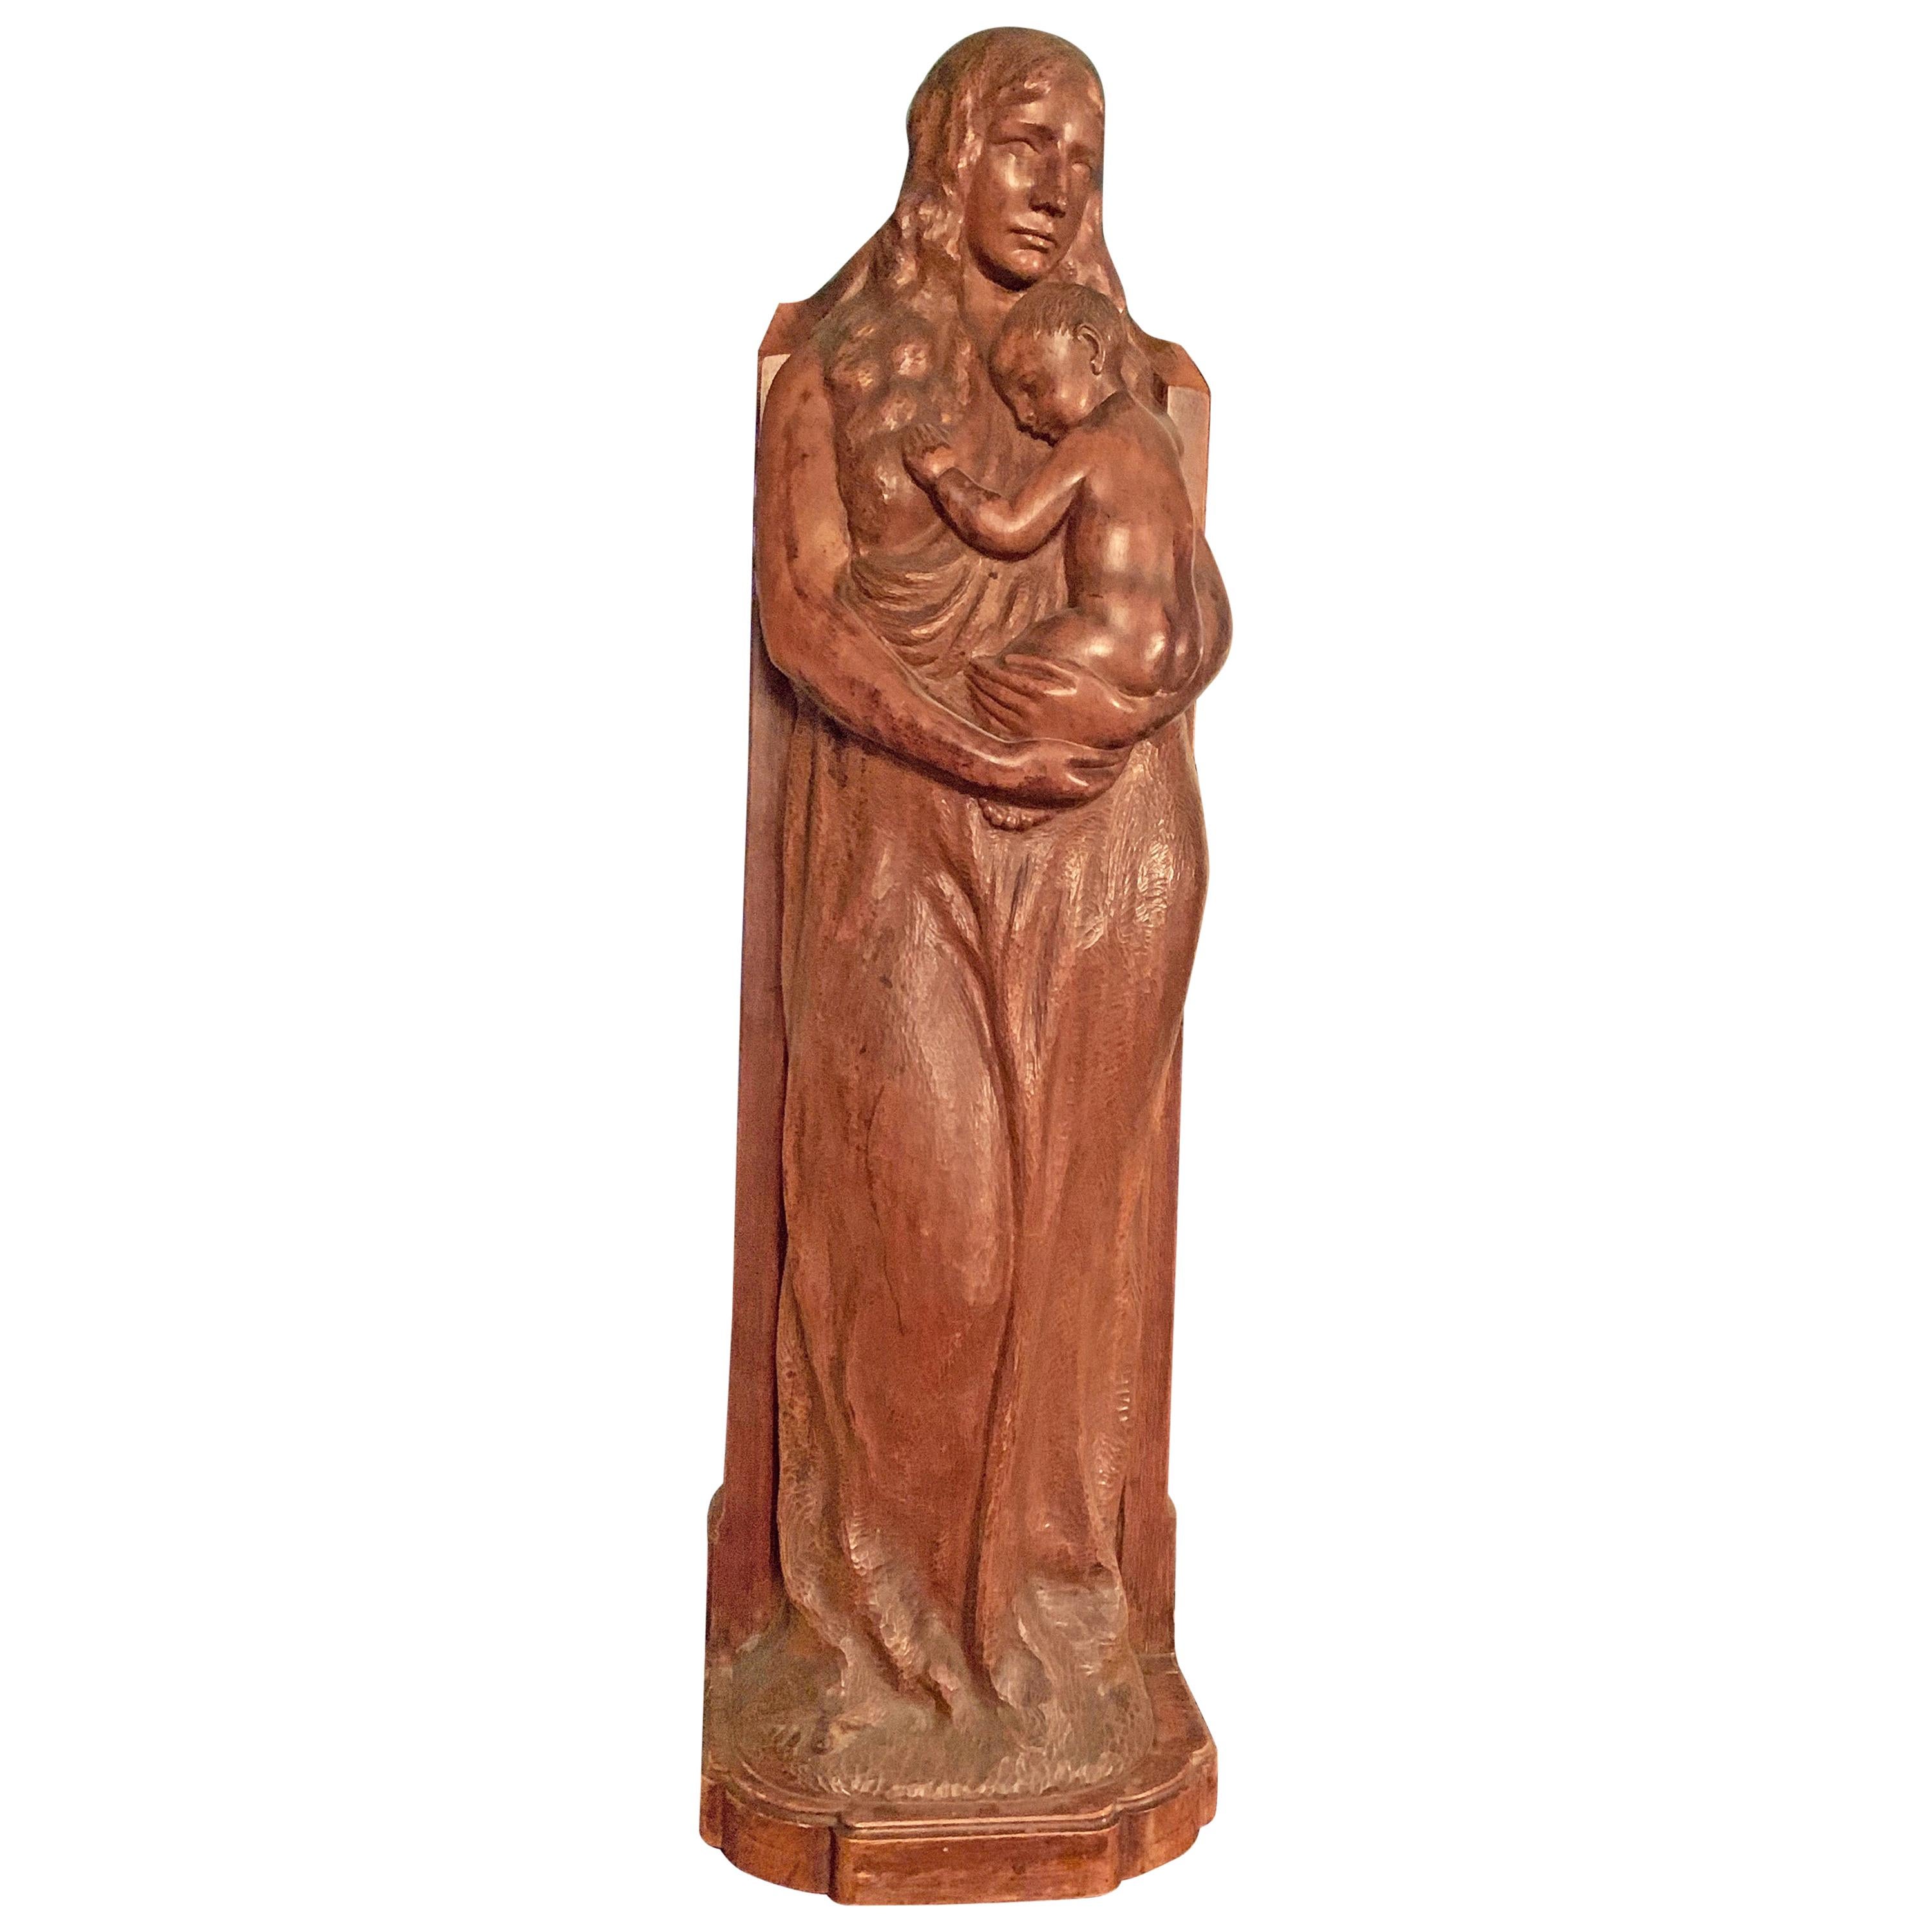 "Woman and Child, " Logan Medal-Winning, Large Mahogany Sculpture by Zettler